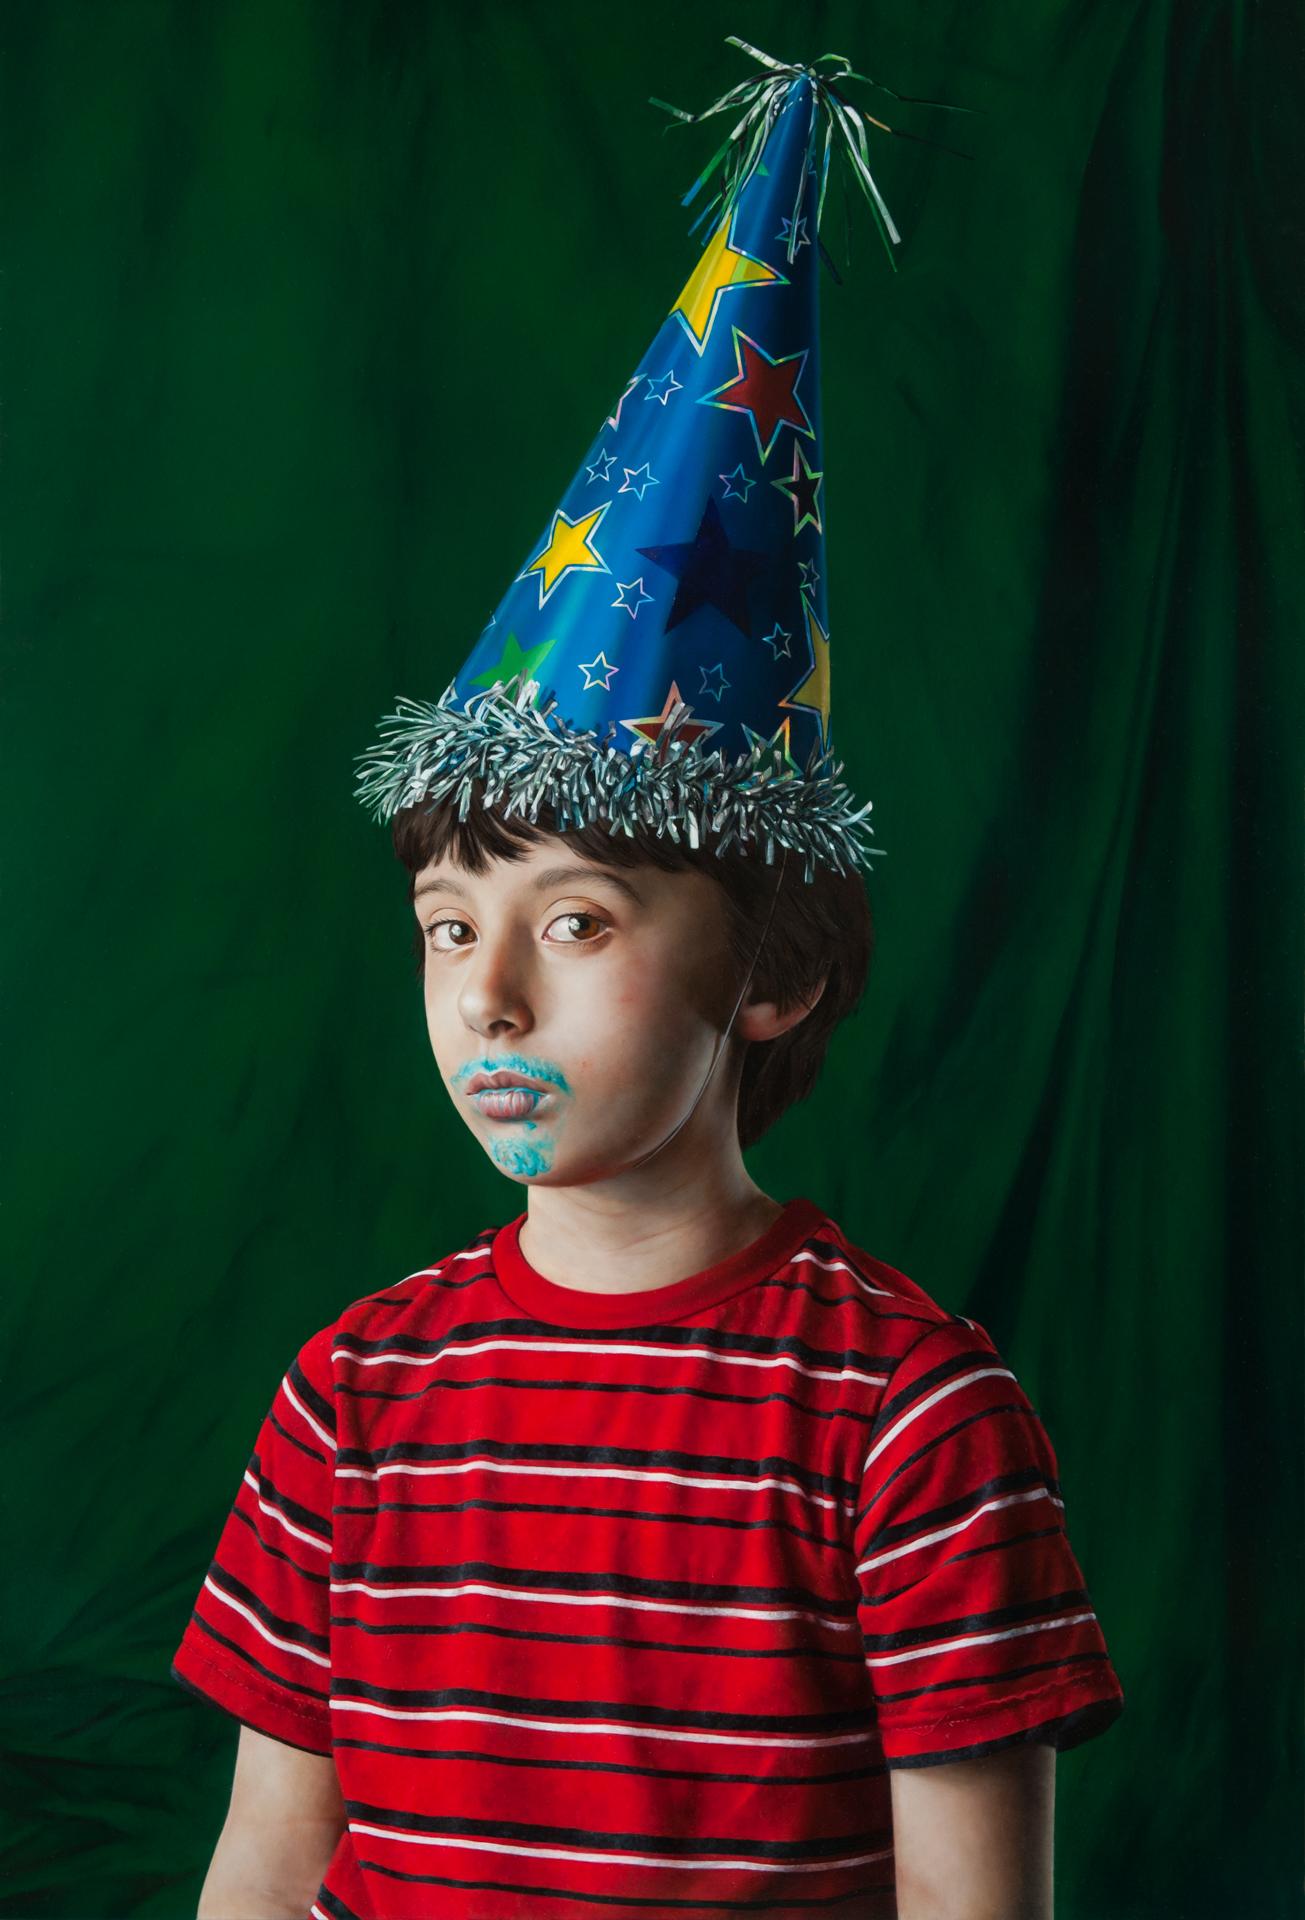 Youth in a Party Hat